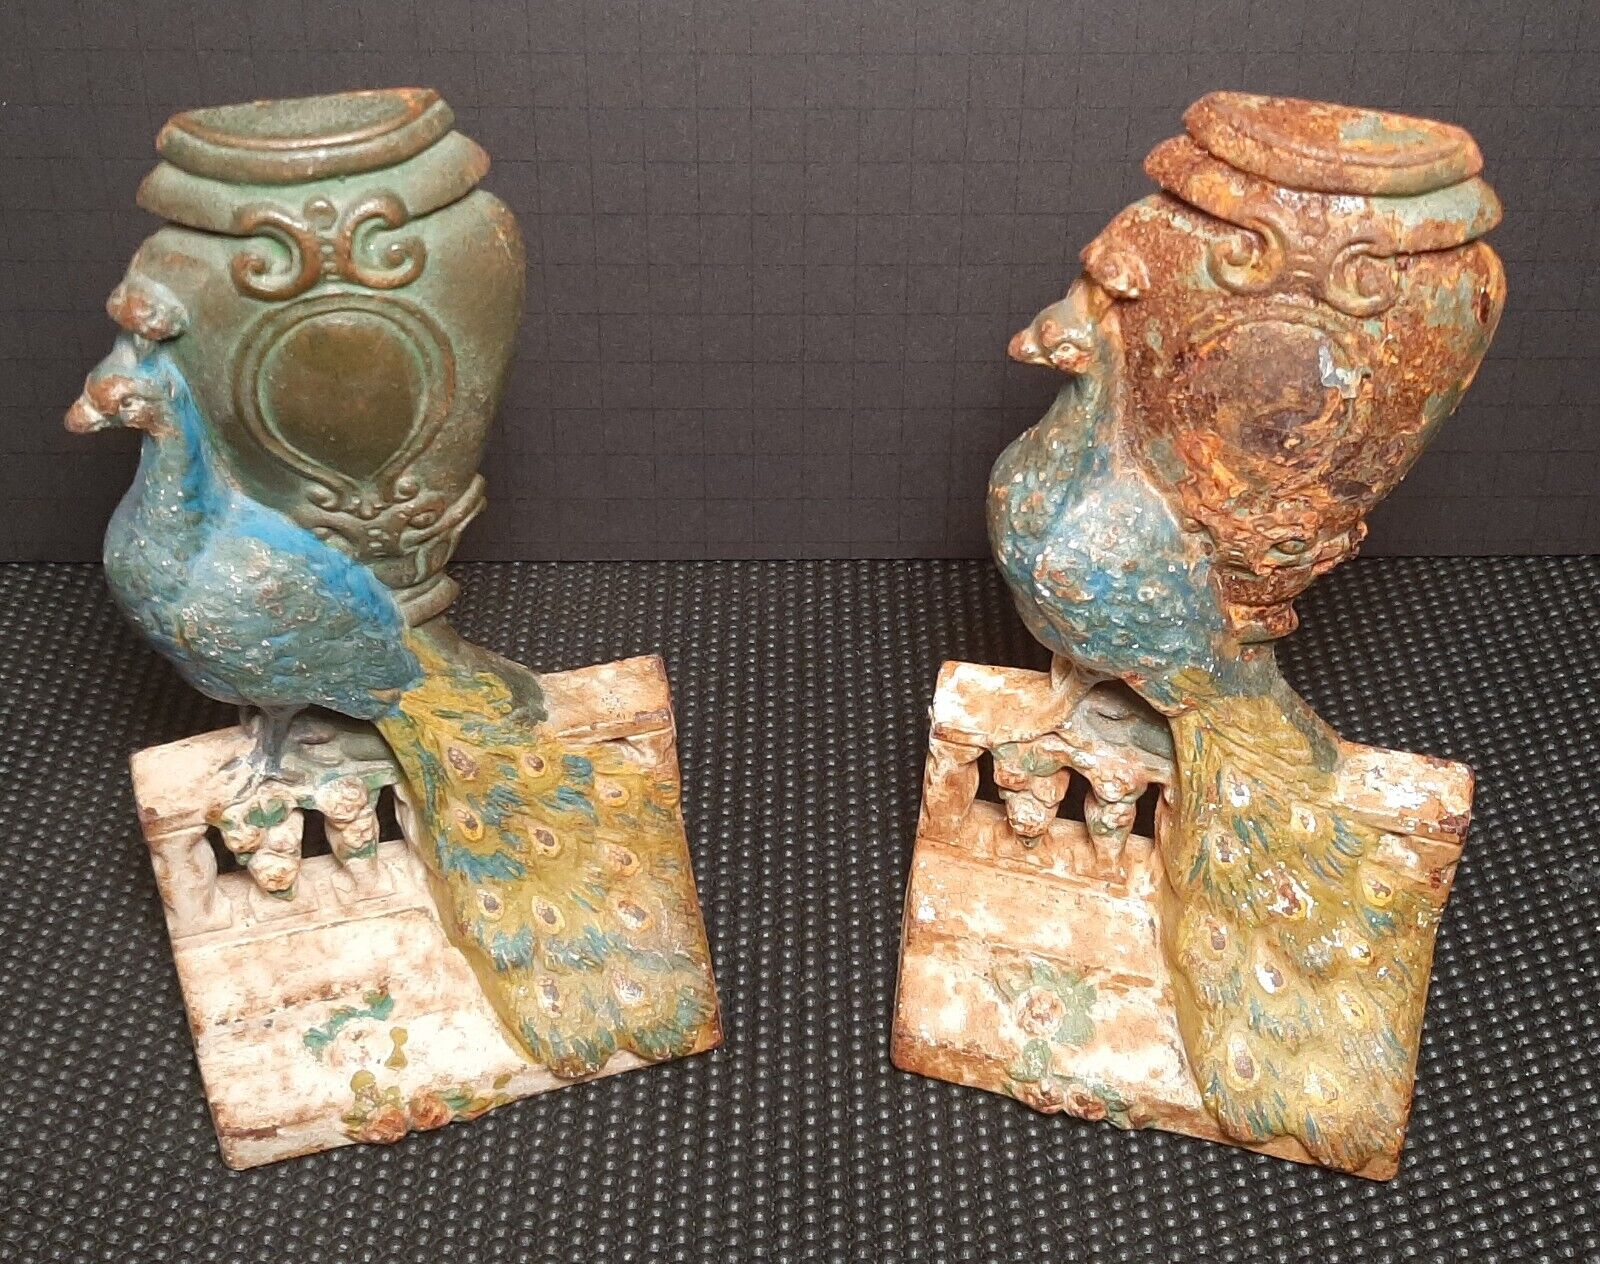 Rare Antique Cast Iron Doorstops Hubley Peacocks by URN #208 (1900-1940)